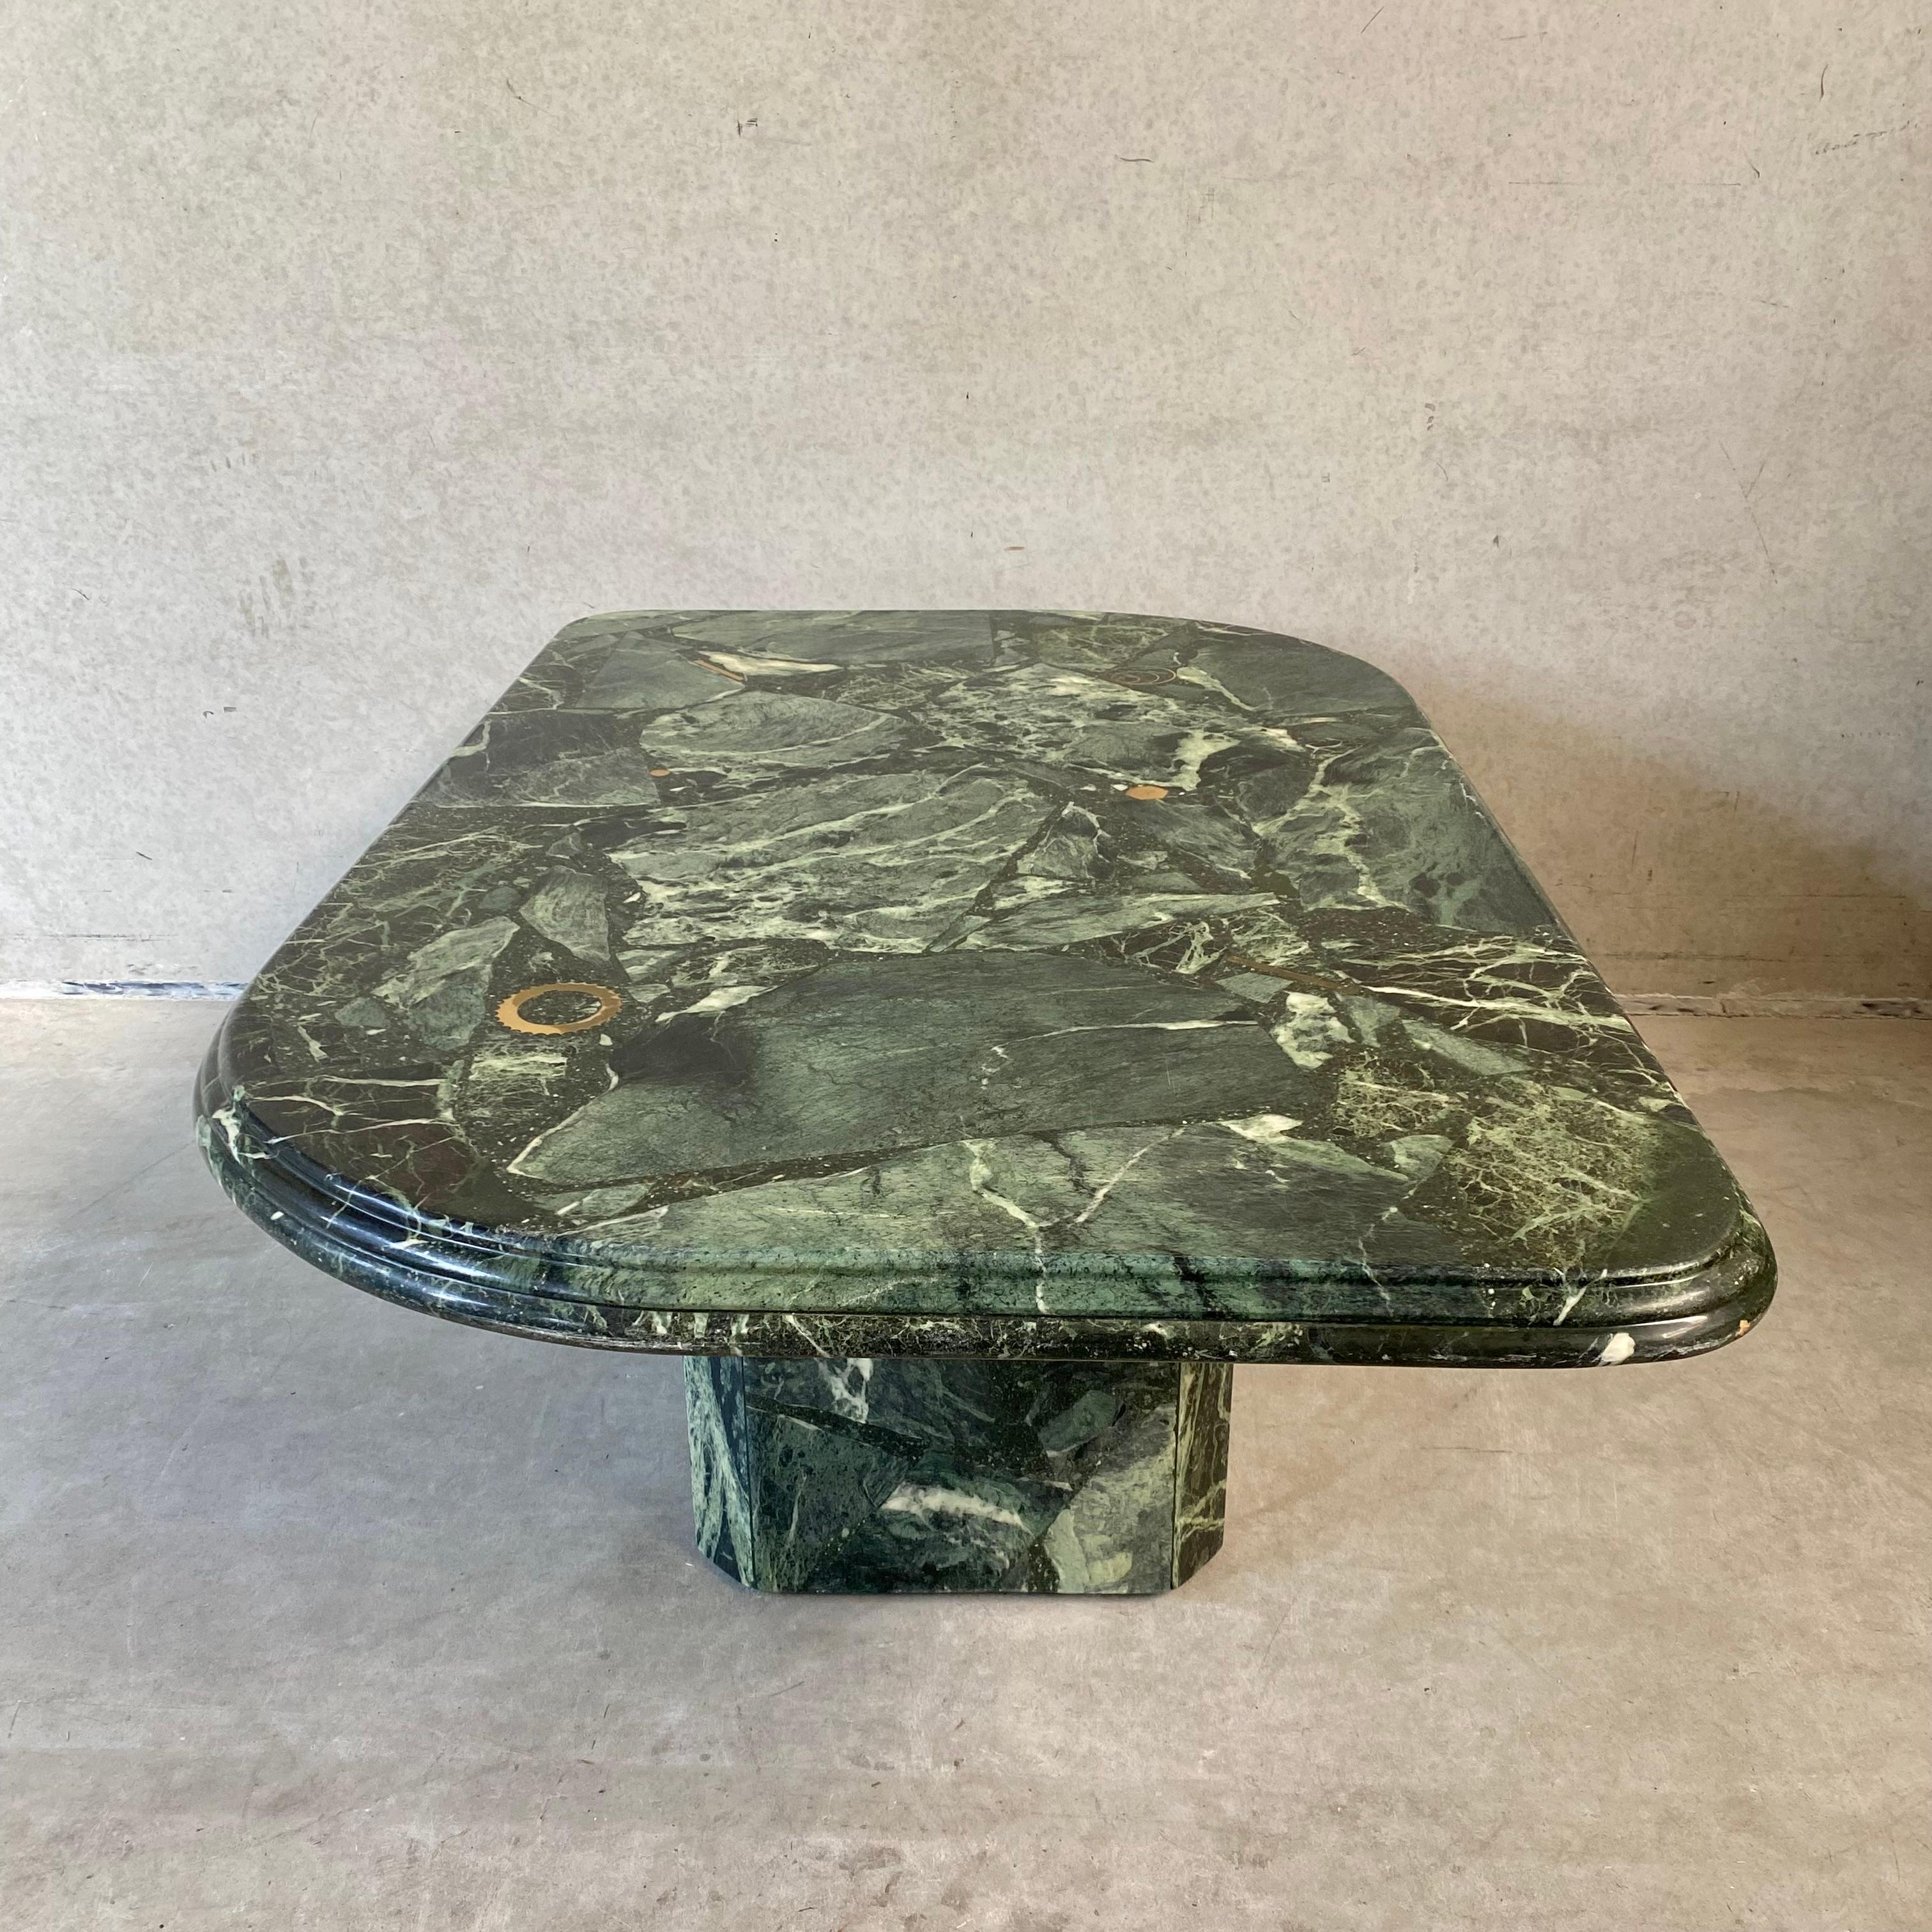 Introducing the Vintage Green Marble Brutalist Coffee Table by FEDAM

Add a touch of timeless elegance and striking design to your living space with the Vintage Green Marble Brutalist Coffee Table by FEDAM. This exquisite piece, made in 1980,